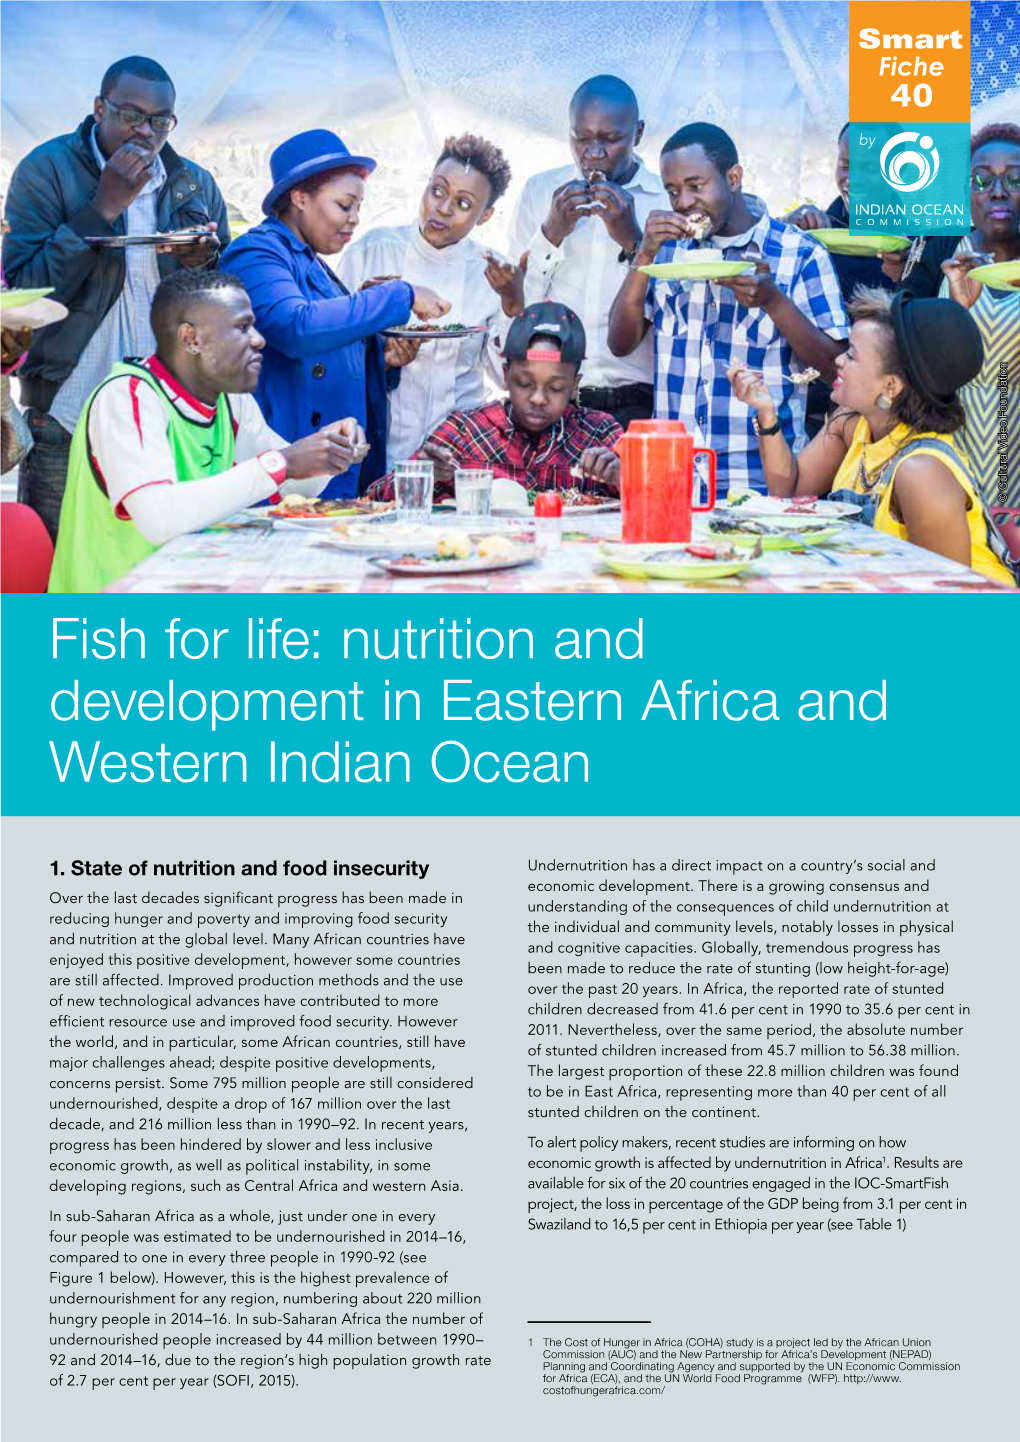 Fish for Life: Nutrition and Development in Eastern Africa and Western Indian Ocean